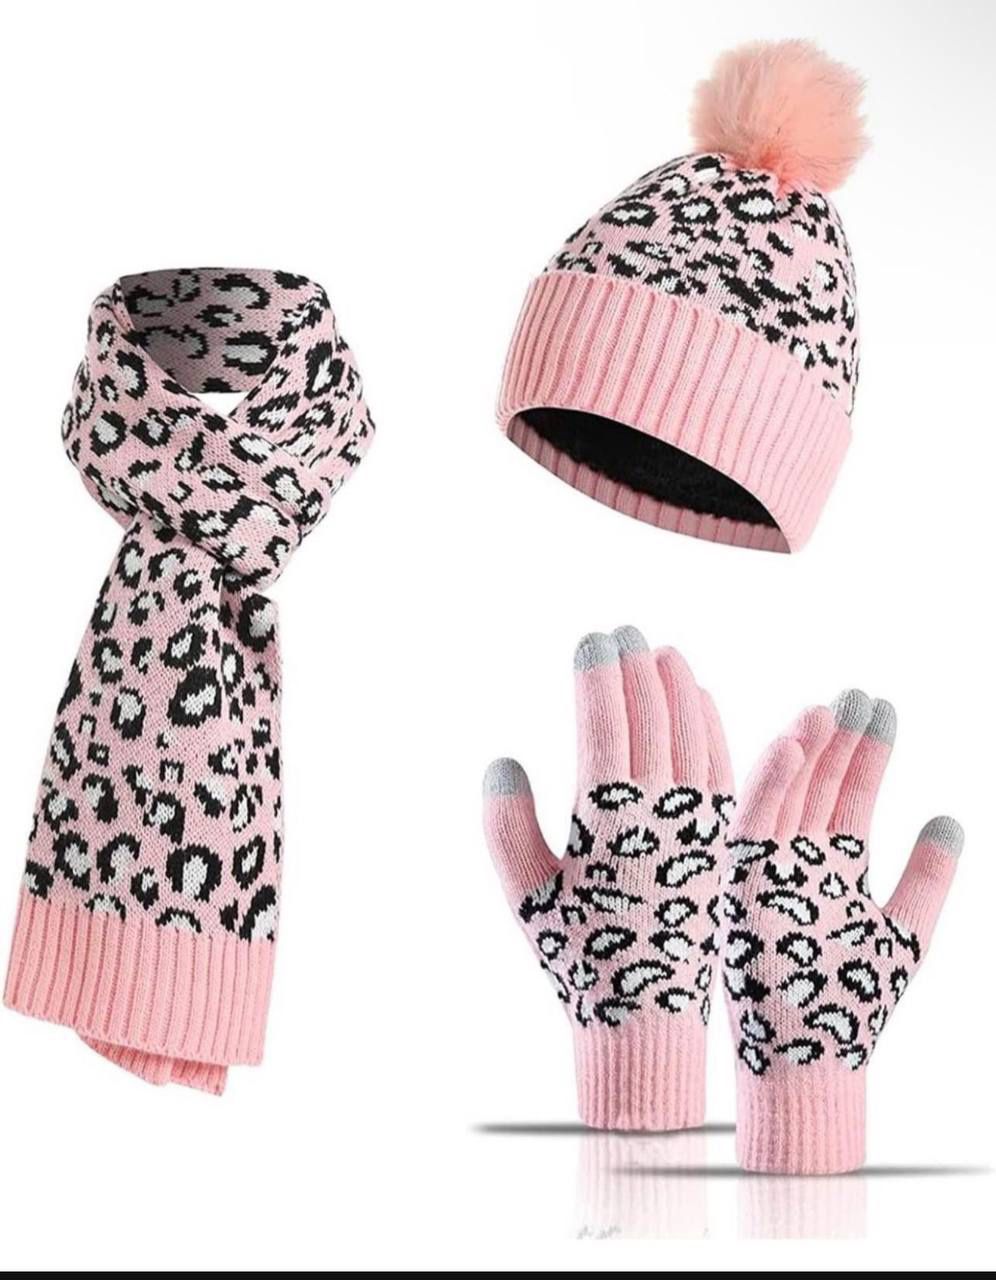 ✨New✨3 pc Winter Warm Knitted Beanie, Scarf, Gloves